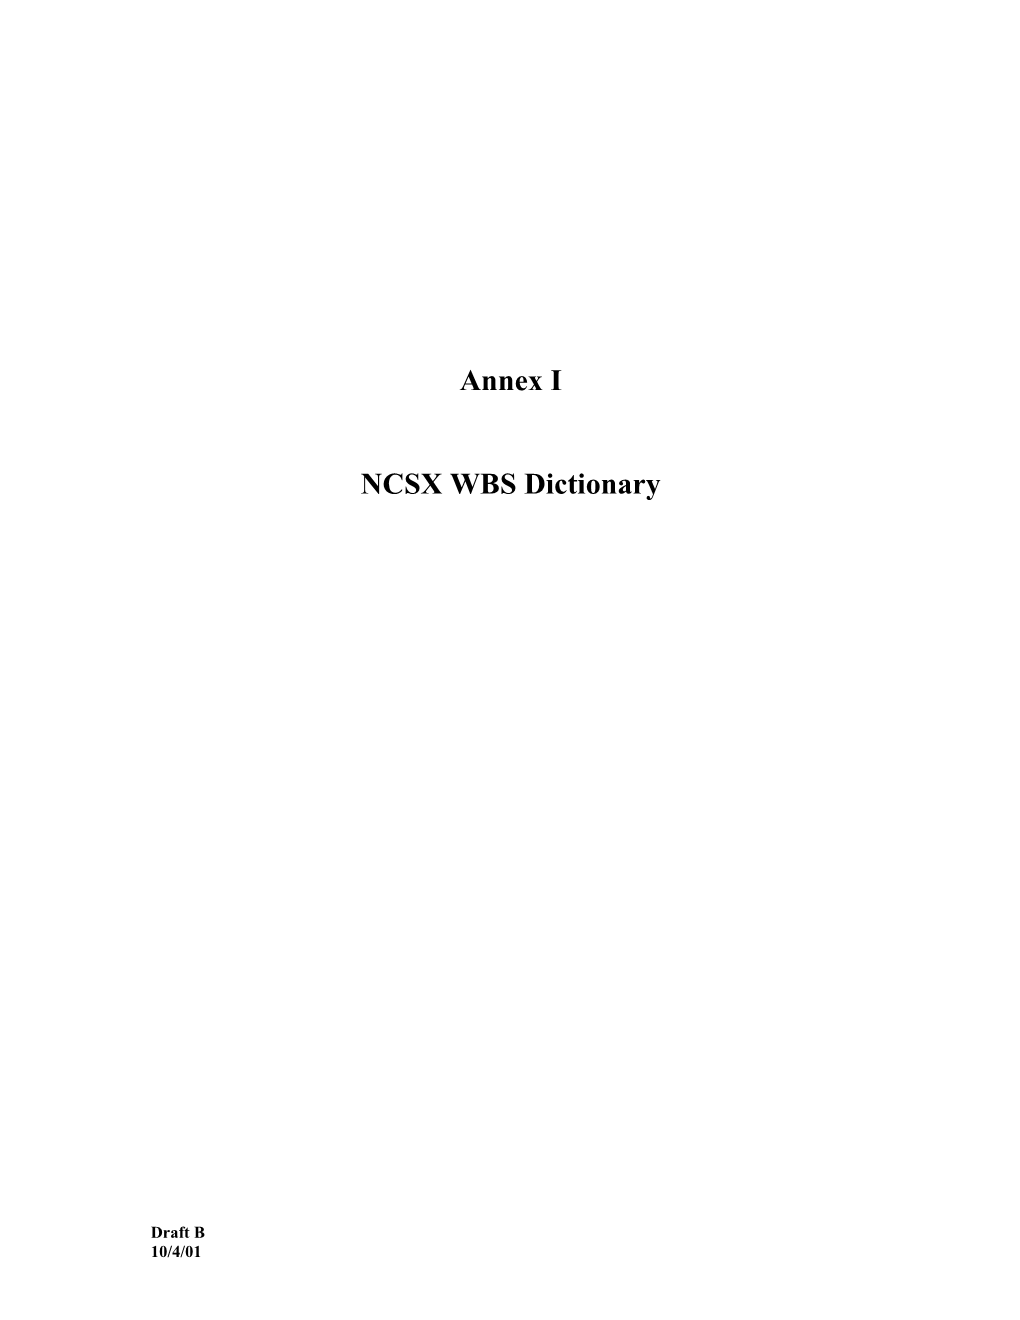 NCSX WBS Dictionary s1